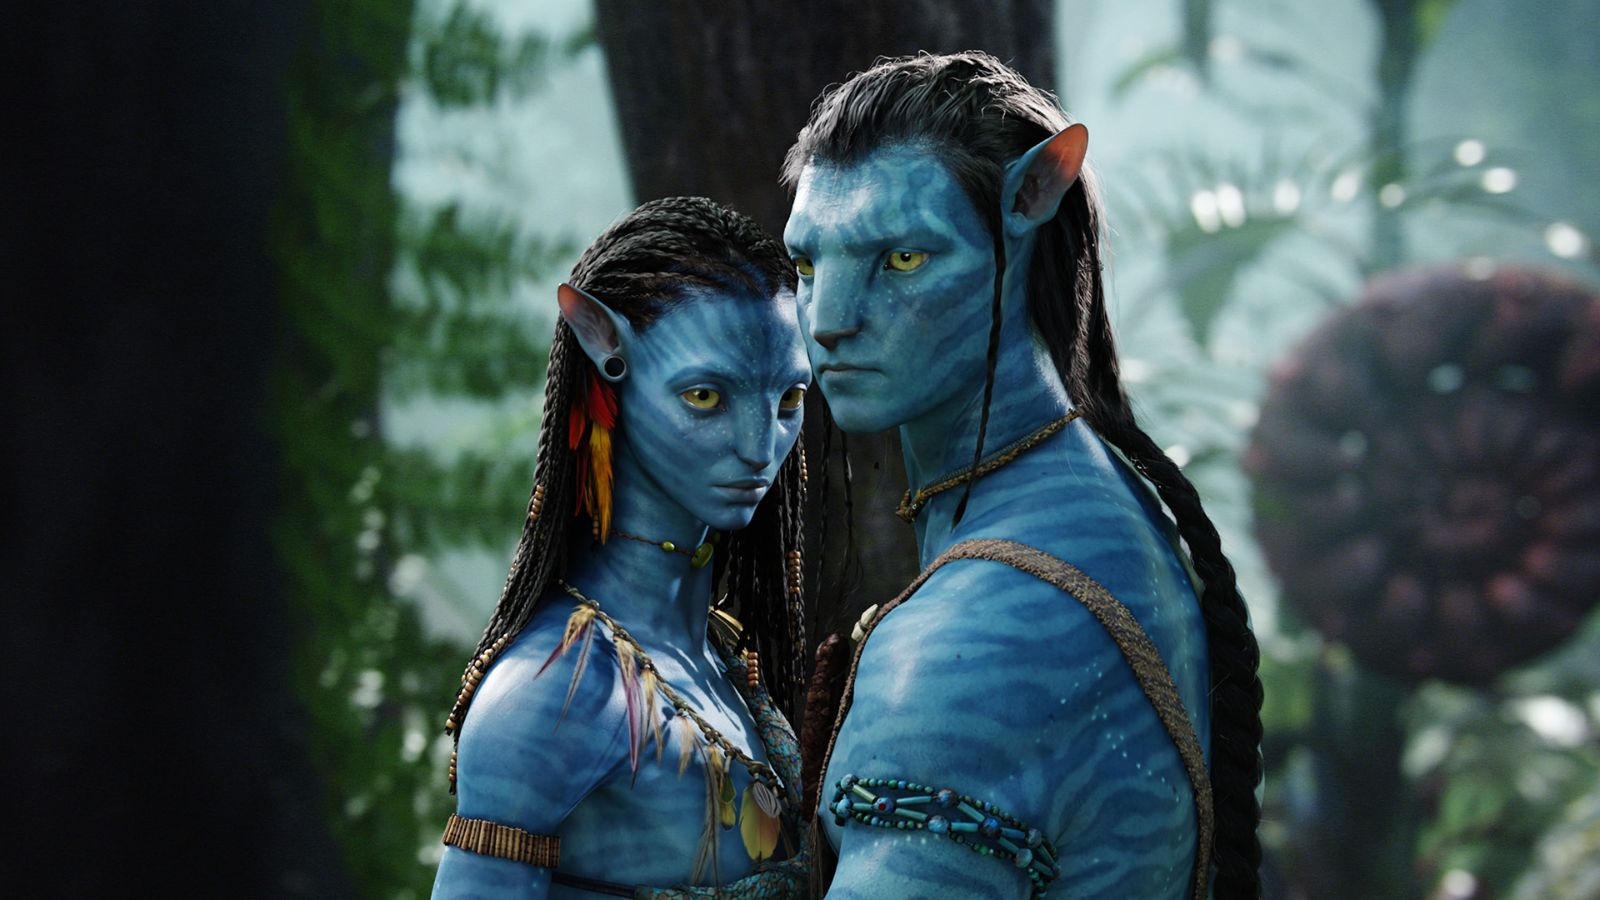 Avatar The Way of Water Hits Bluray and 4K Ultra HD on June 20  Deepest  Dream